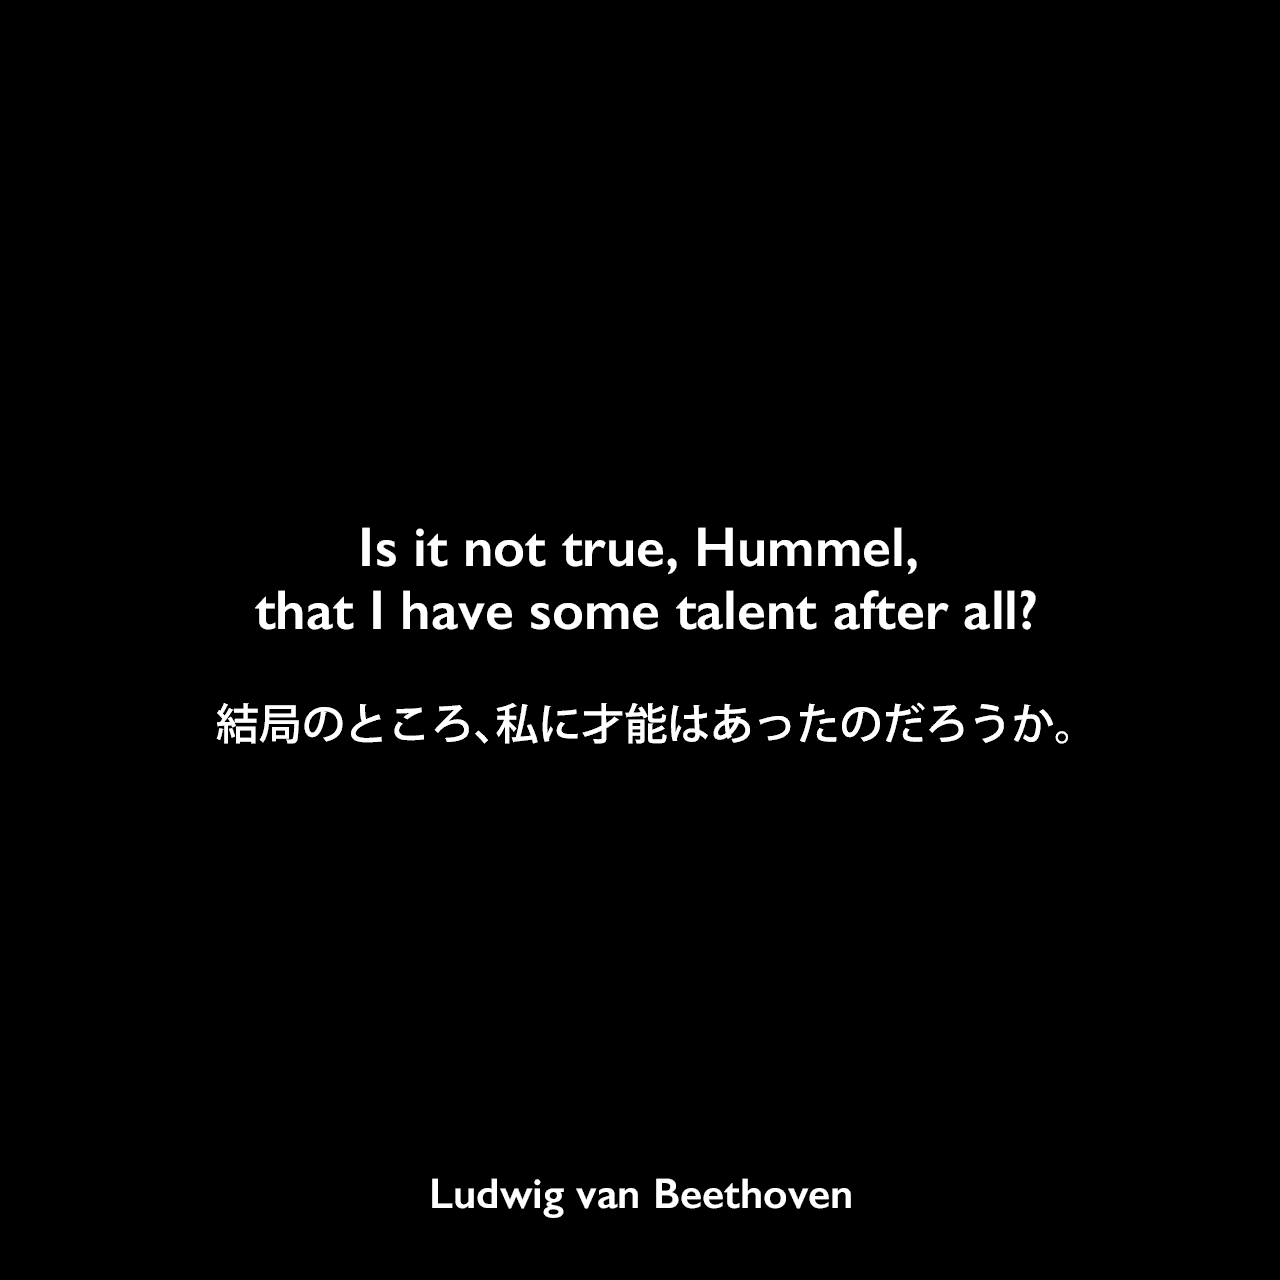 Is it not true, Hummel, that I have some talent after all?結局のところ、私に才能はあったのだろうか。Ludwig van Beethoven